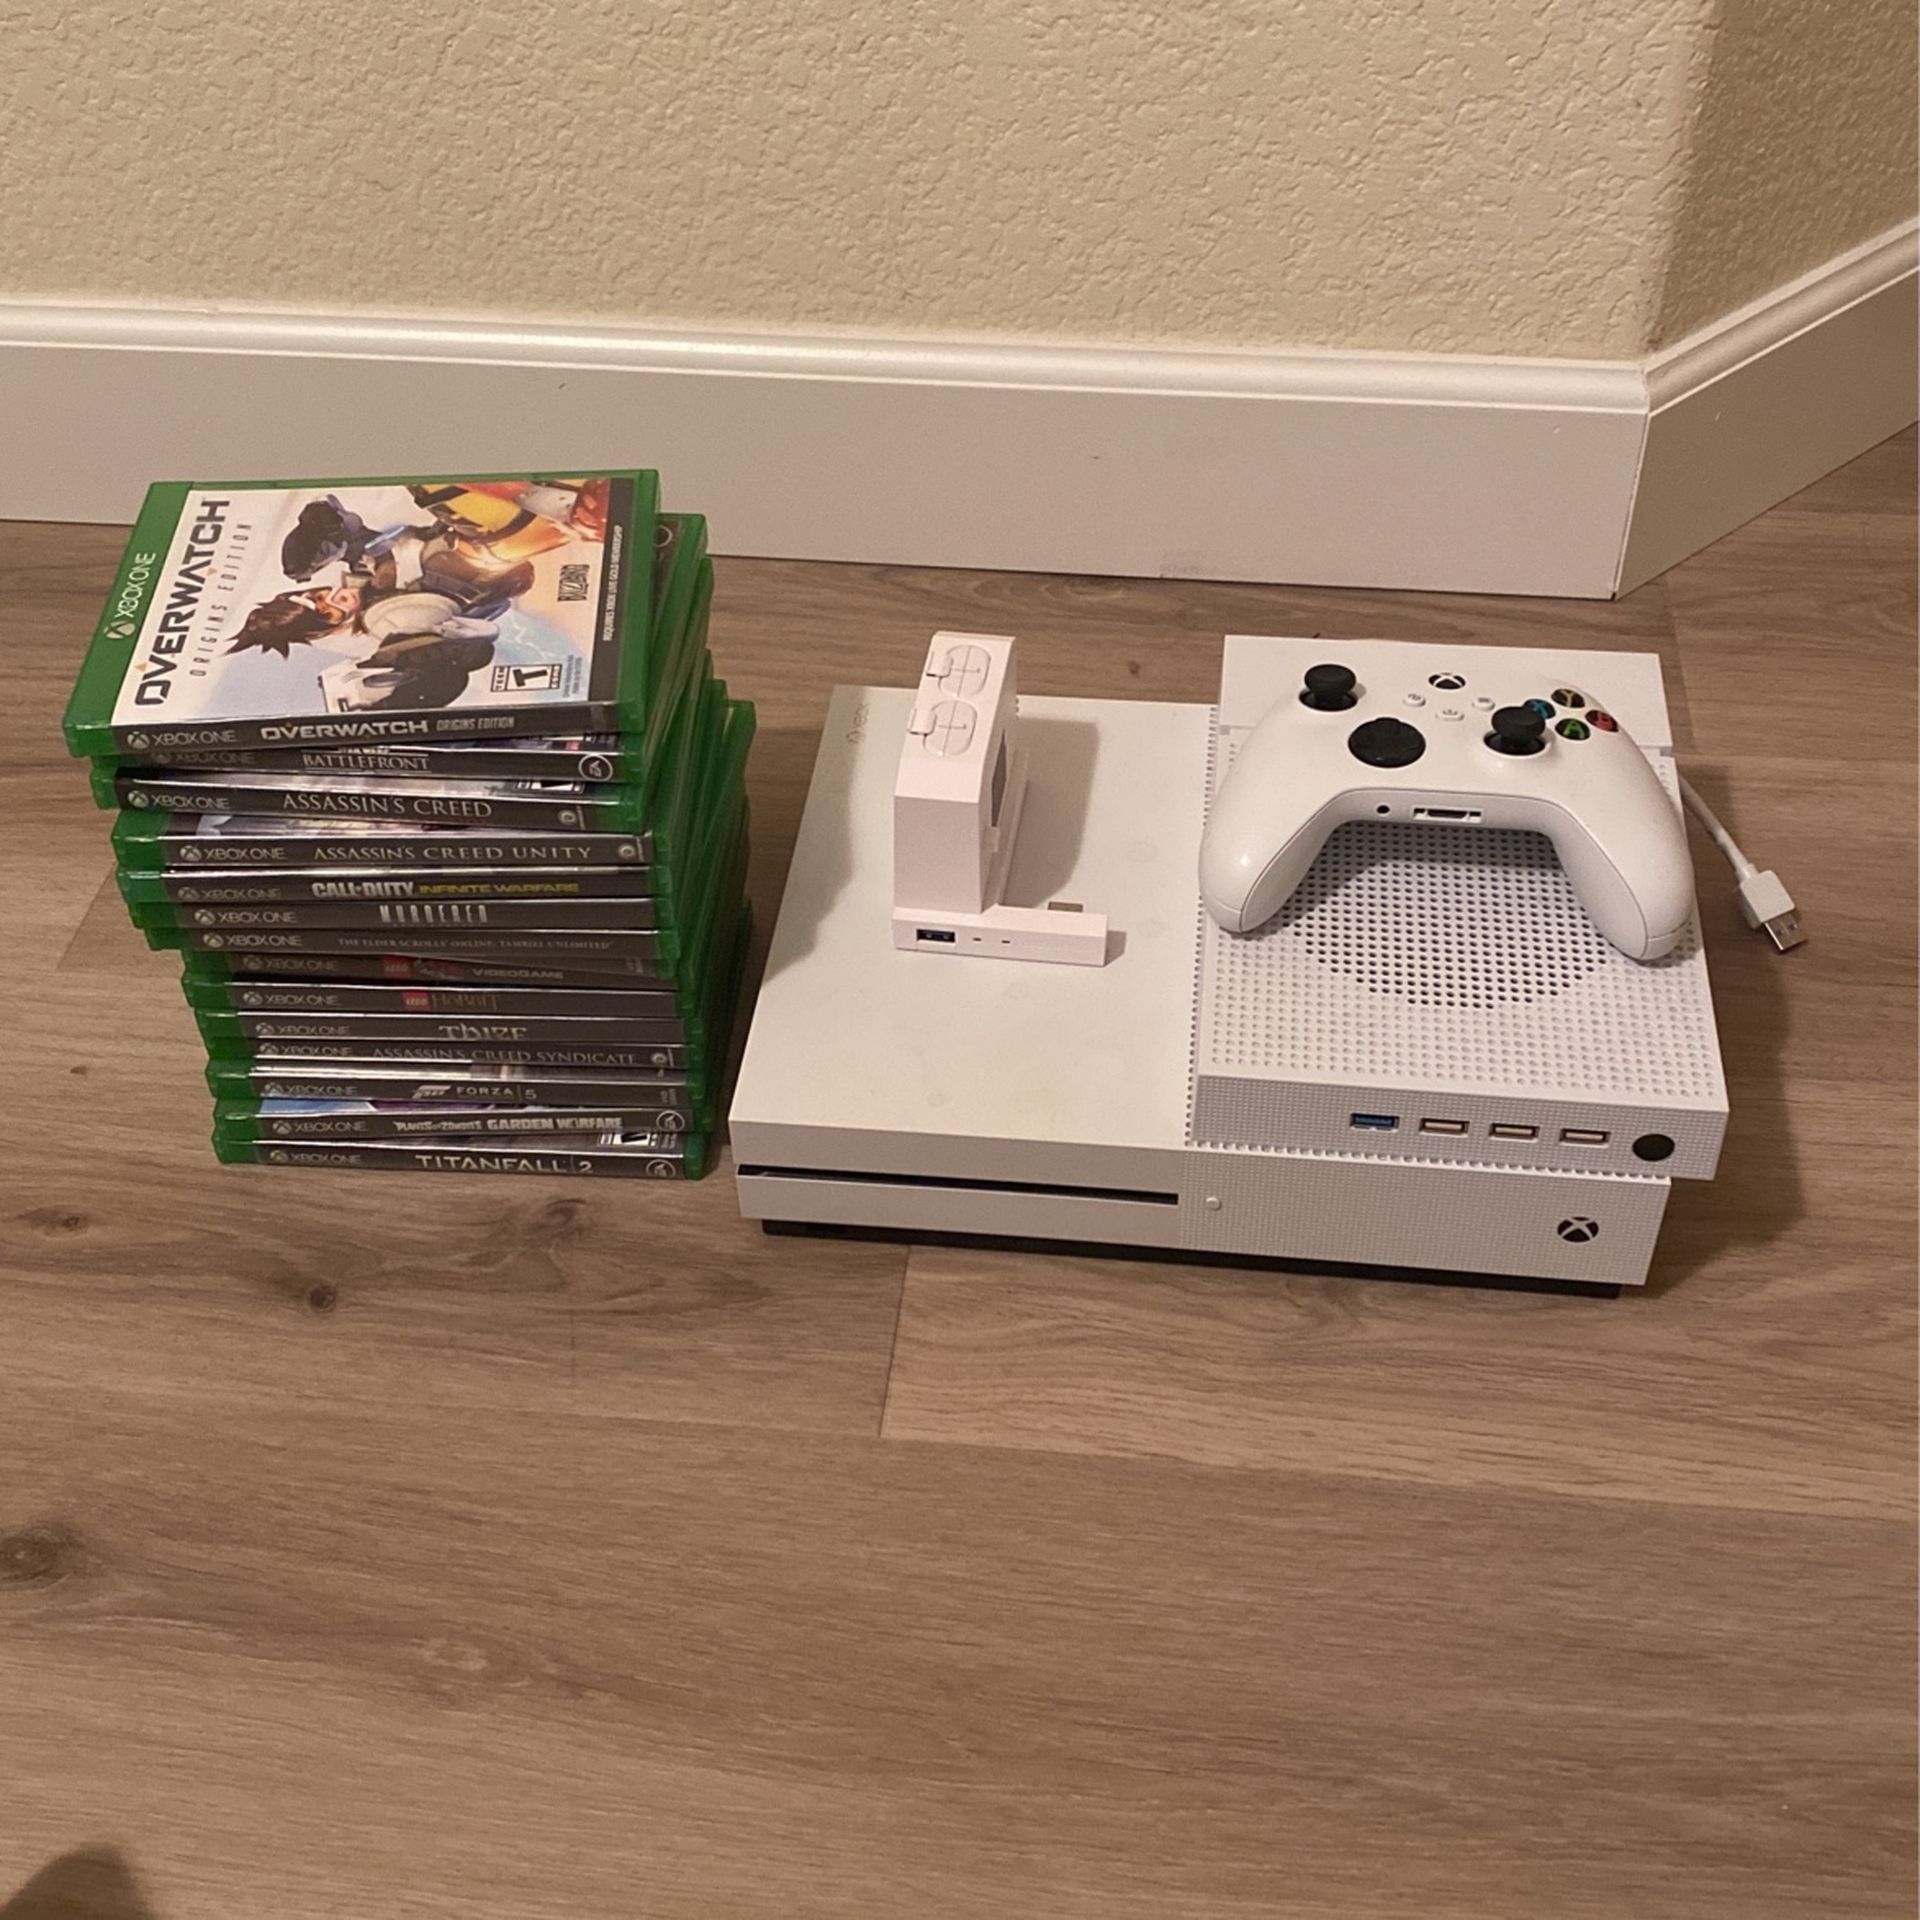 Xbox One S with New Gen Controller, Games, Rechargeable Batteries, And Fan